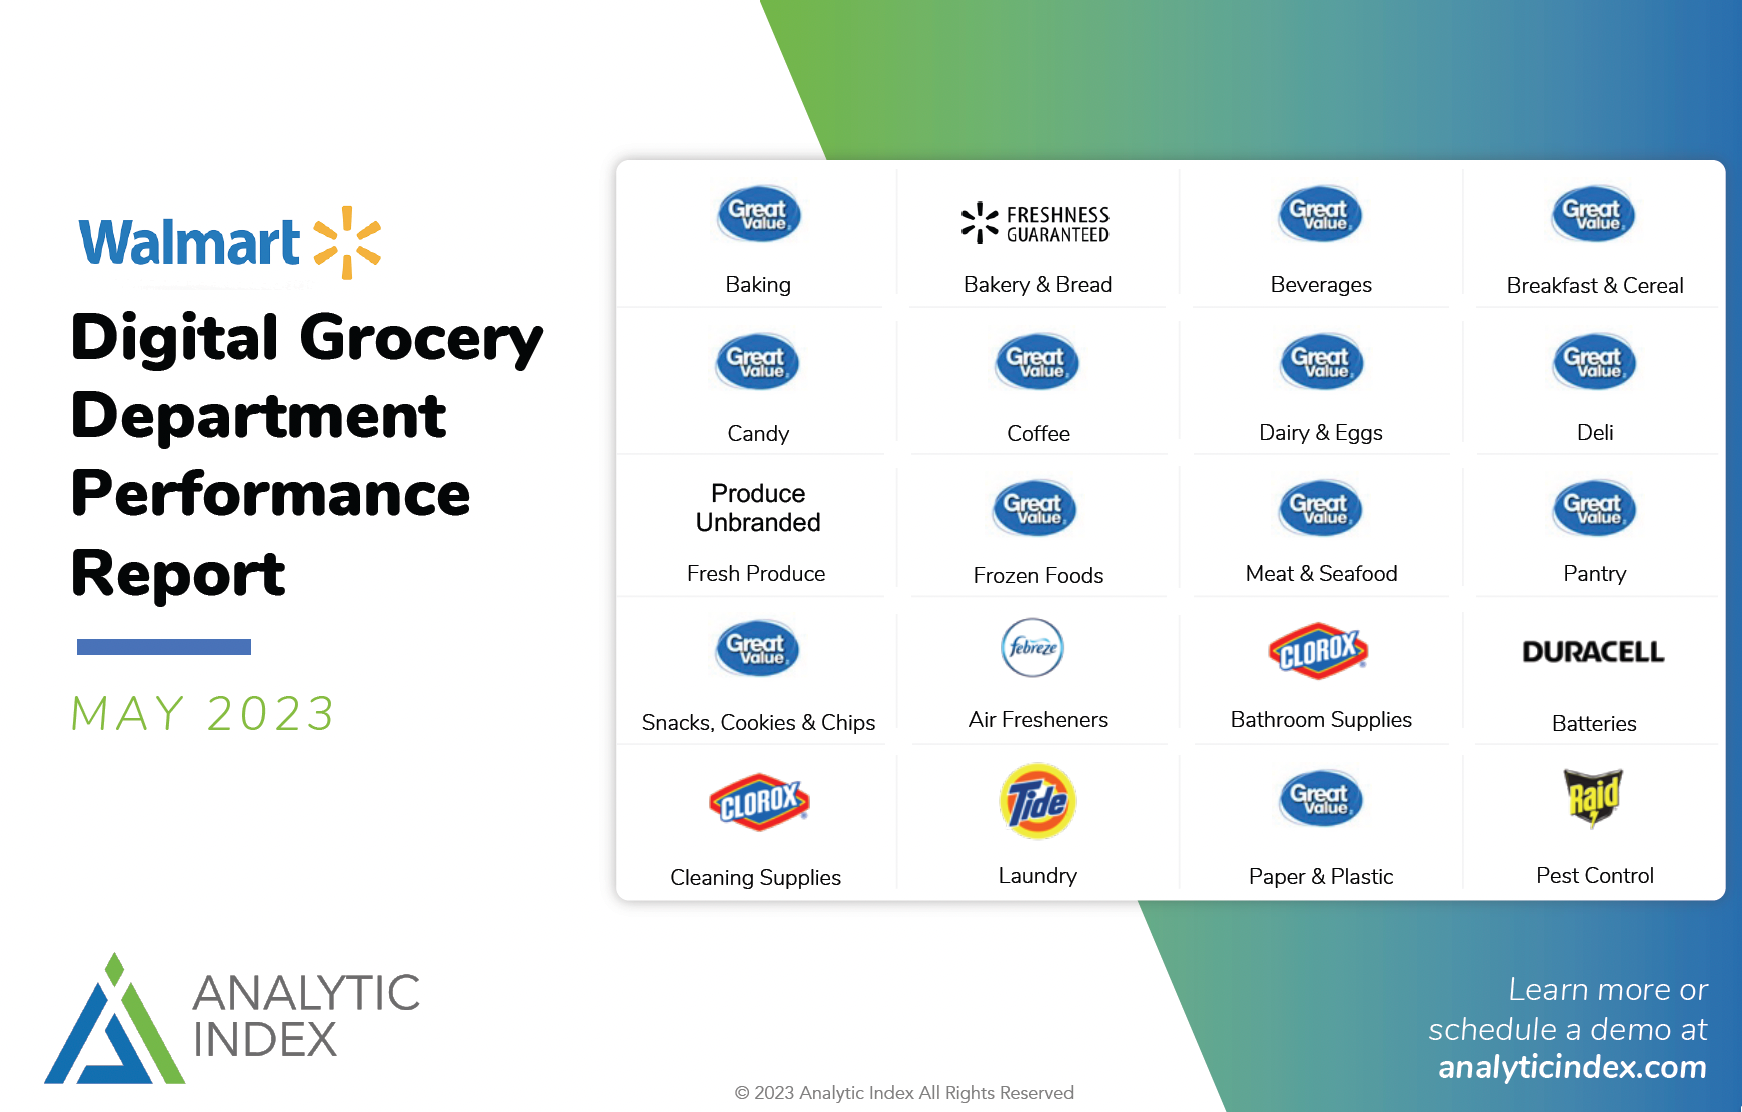 Cursor_and_Analytic_Index_-_Walmart_Digital_Grocery_-_May_2023_Performance_pdf